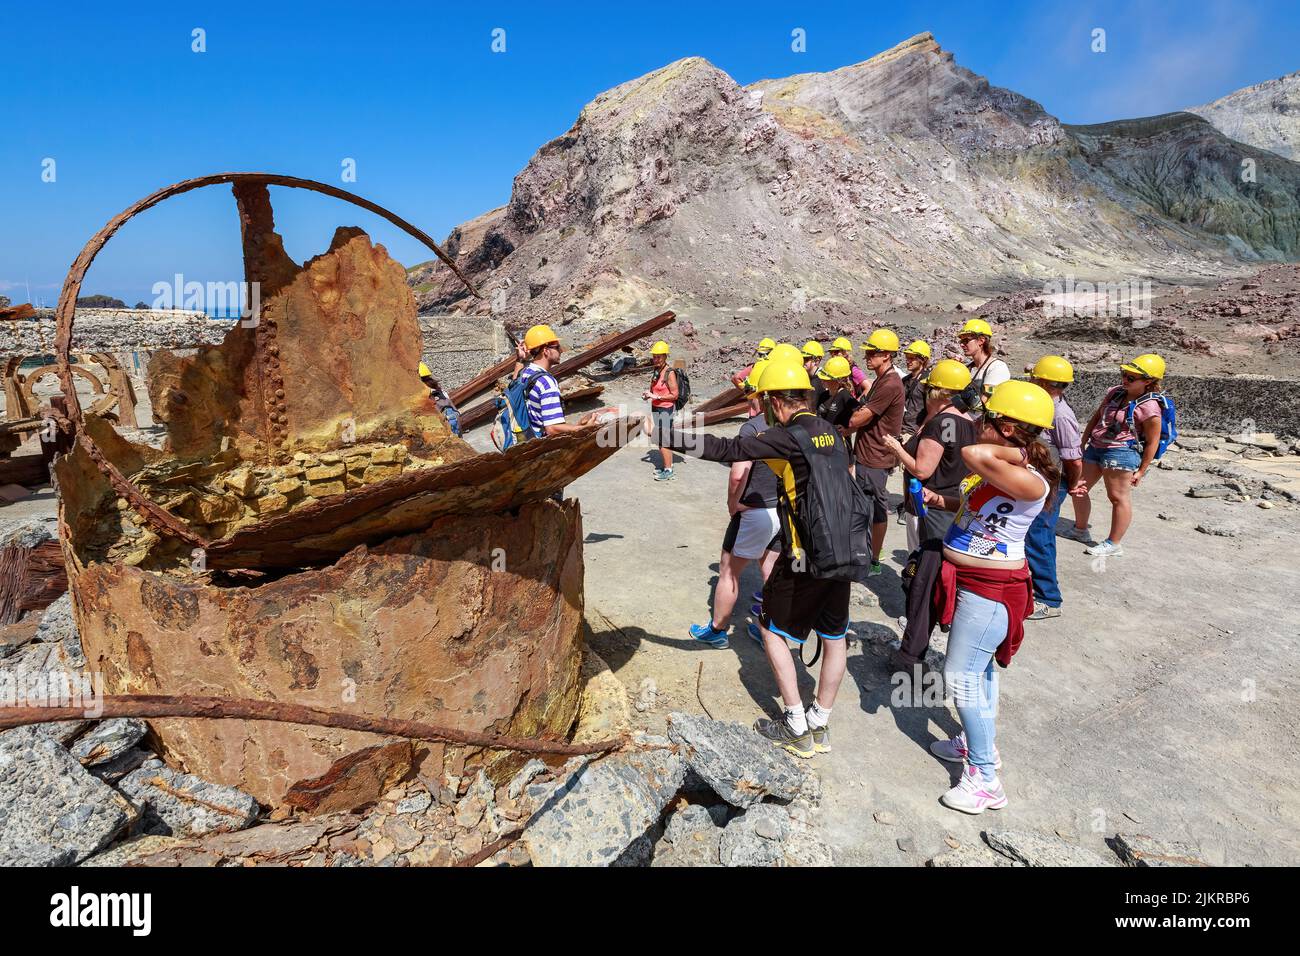 A tour group stands amid the ruins of an old sulfur processing plant on White Island, an active volcano in the Bay of Plenty, New Zealand Stock Photo